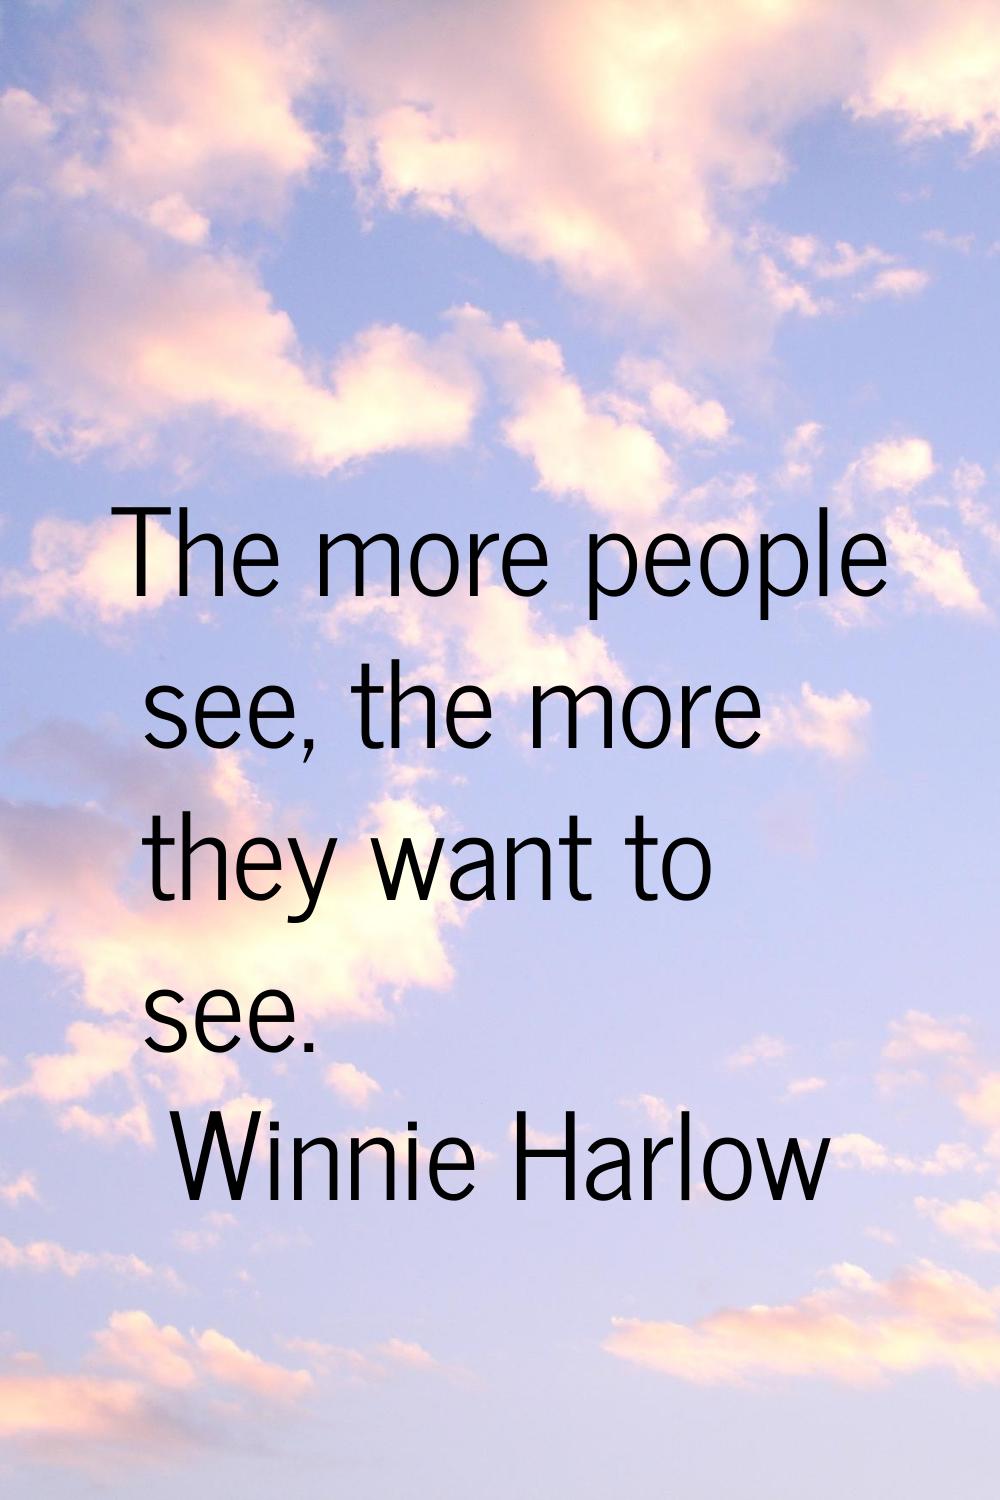 The more people see, the more they want to see.